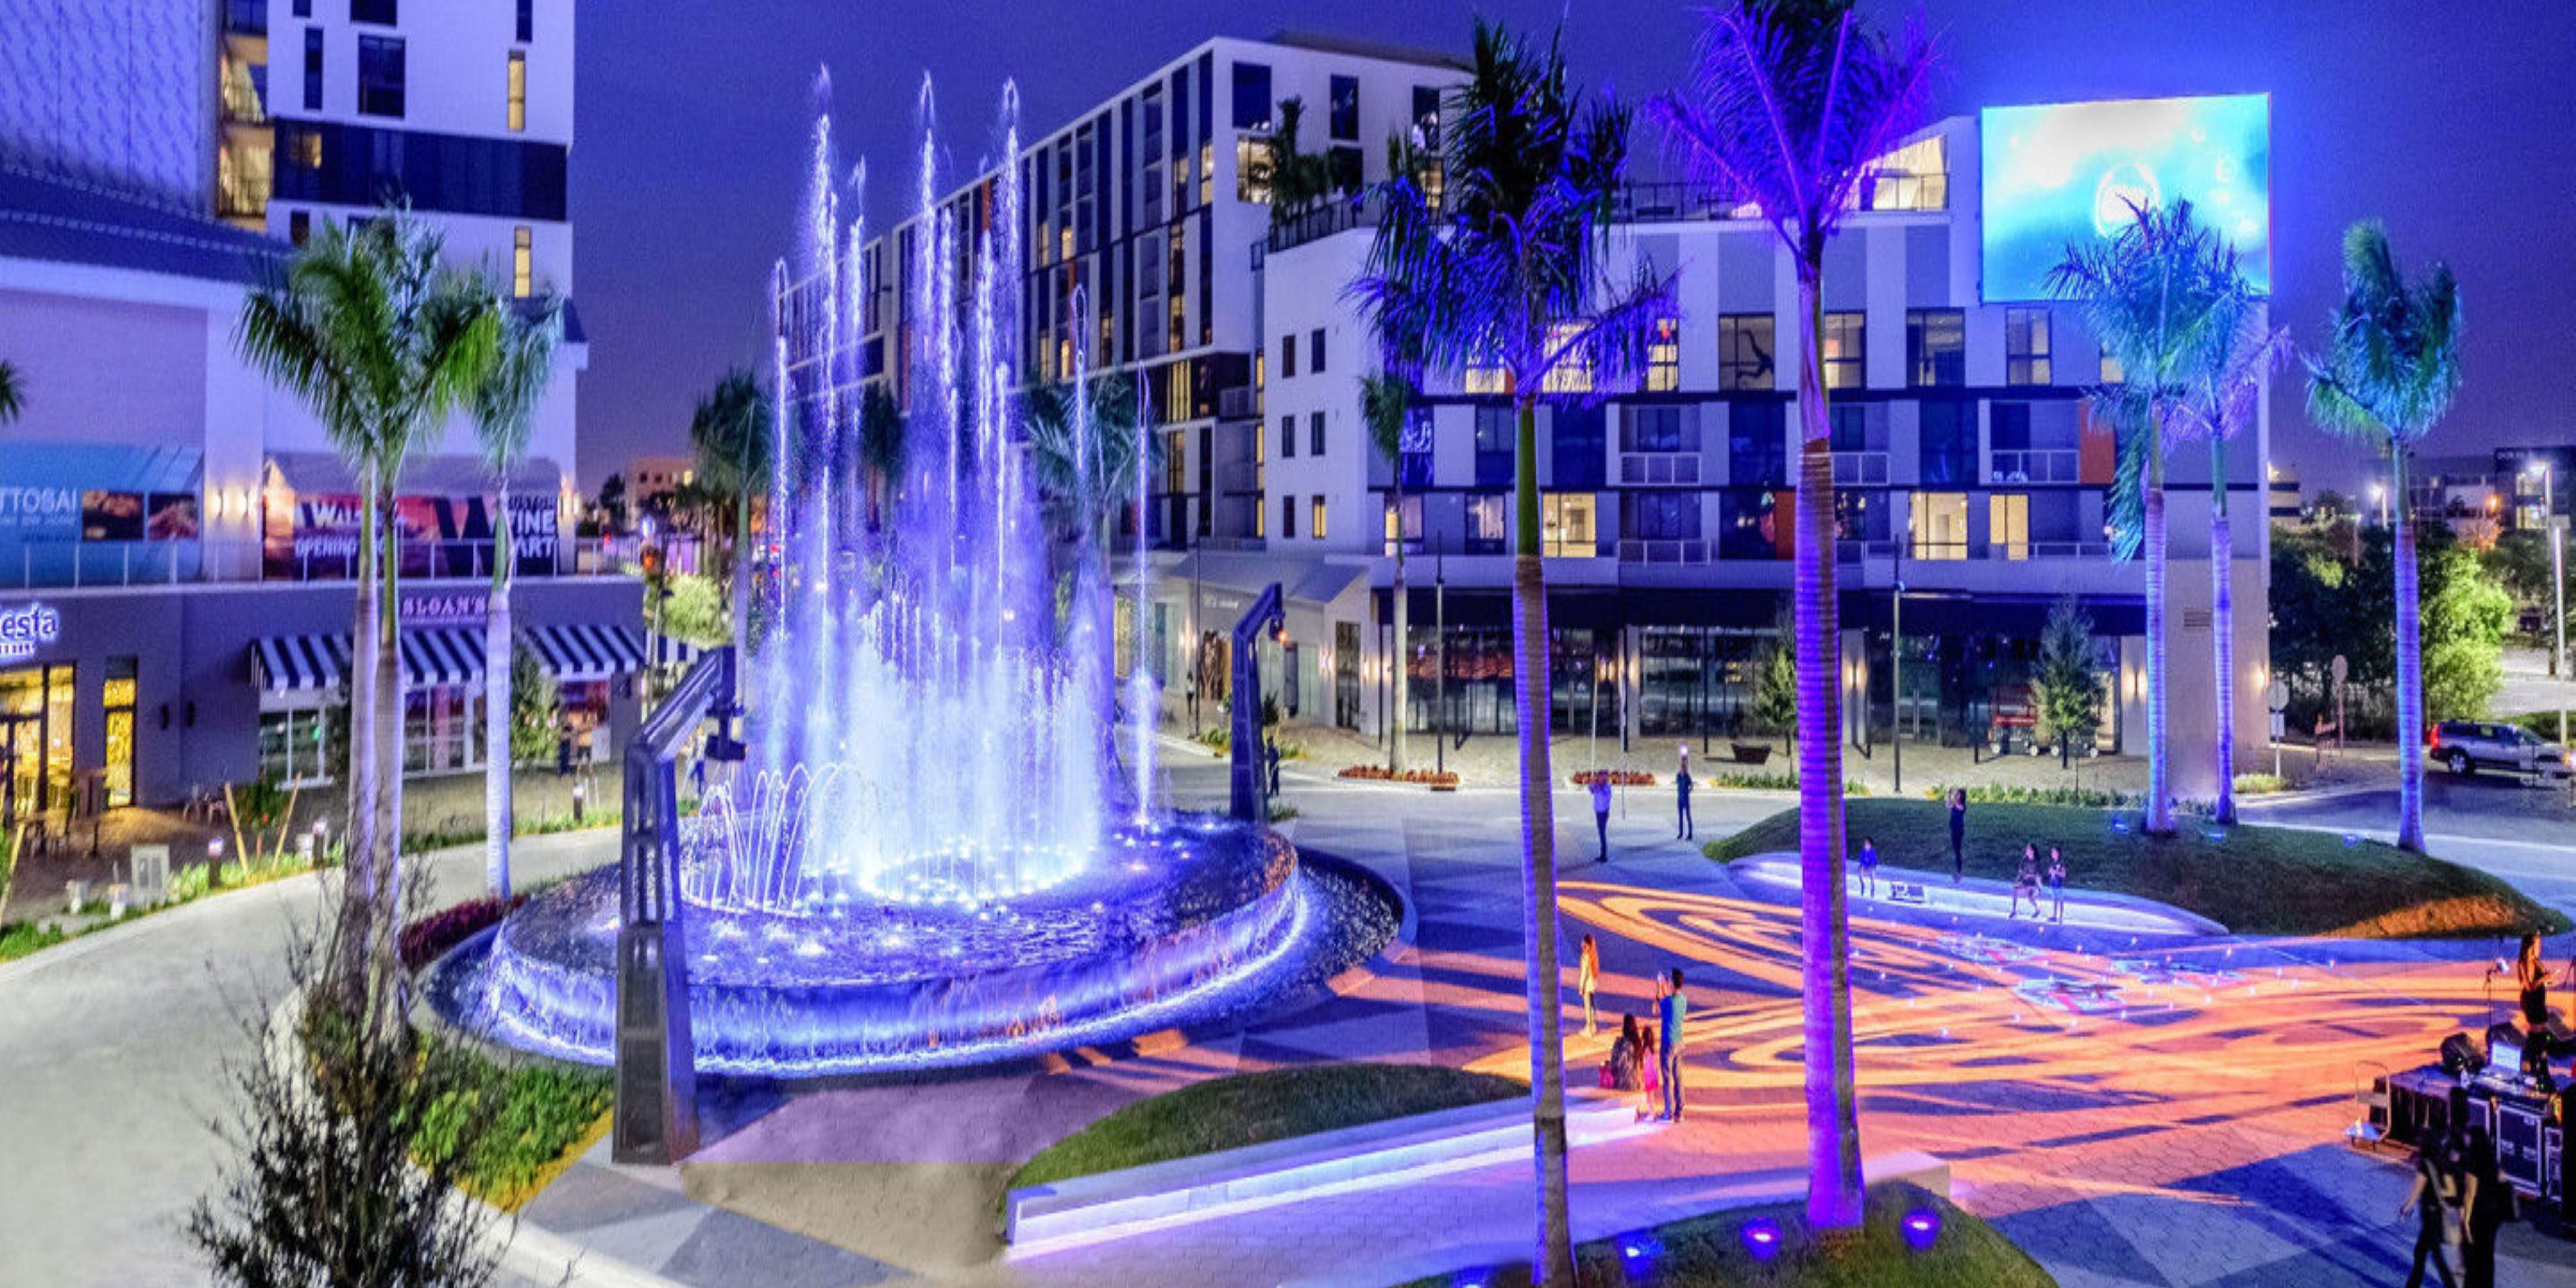 Whether you're travelling for work or leisure, we all deserve a little fun. City Place Doral offers a vast option of night clubs, bars, restaurants, and upscale shopping to choose from.